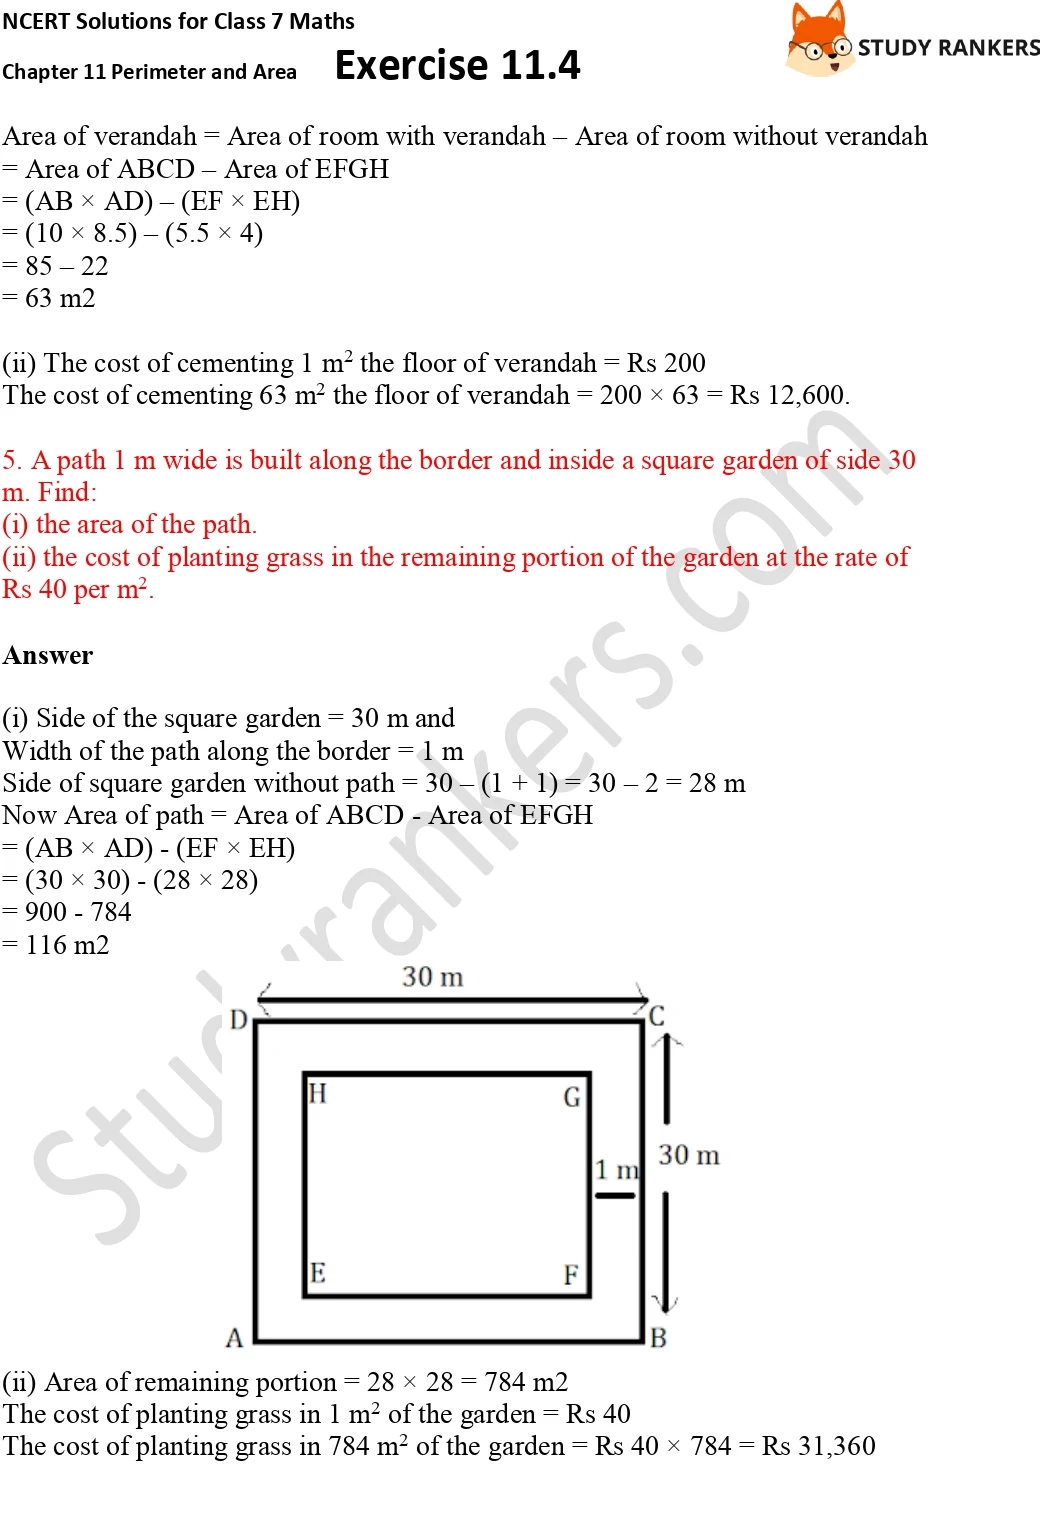 NCERT Solutions for Class 7 Maths Ch 11 Perimeter and Area Exercise 11.4 Part 3